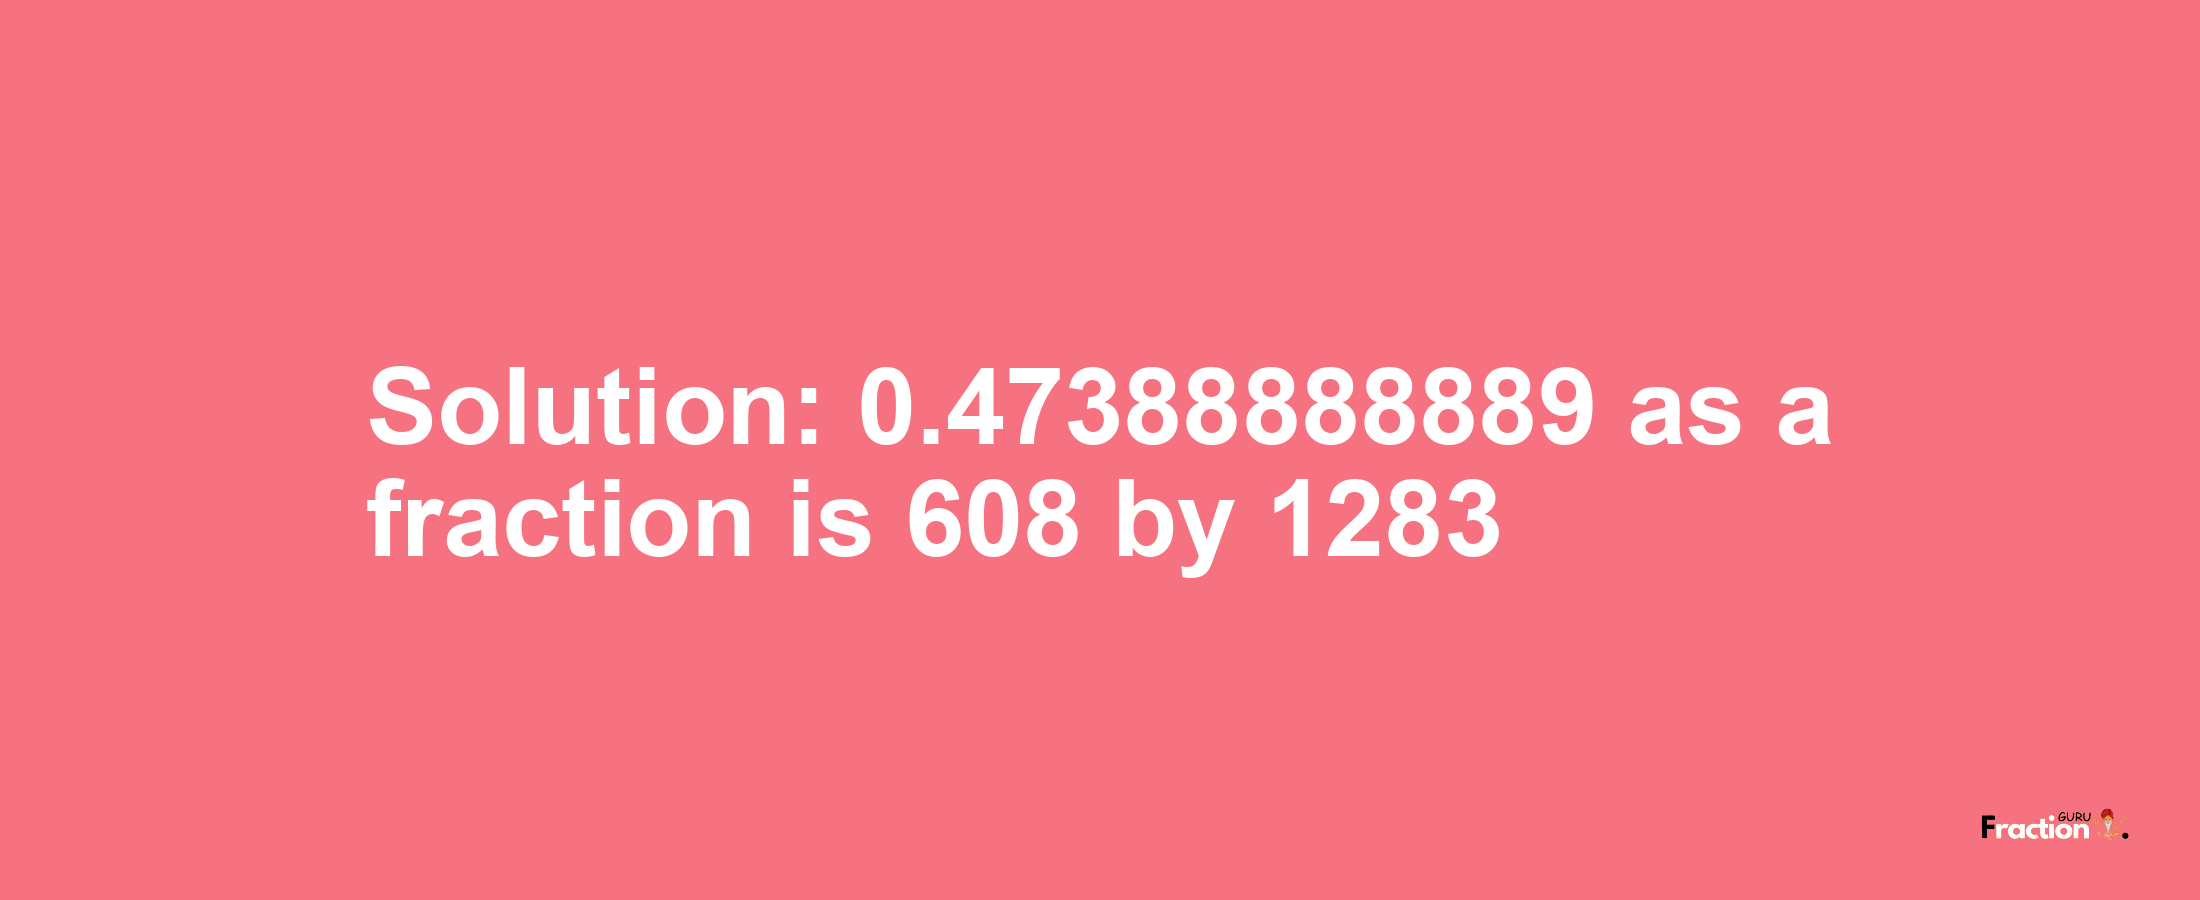 Solution:0.47388888889 as a fraction is 608/1283